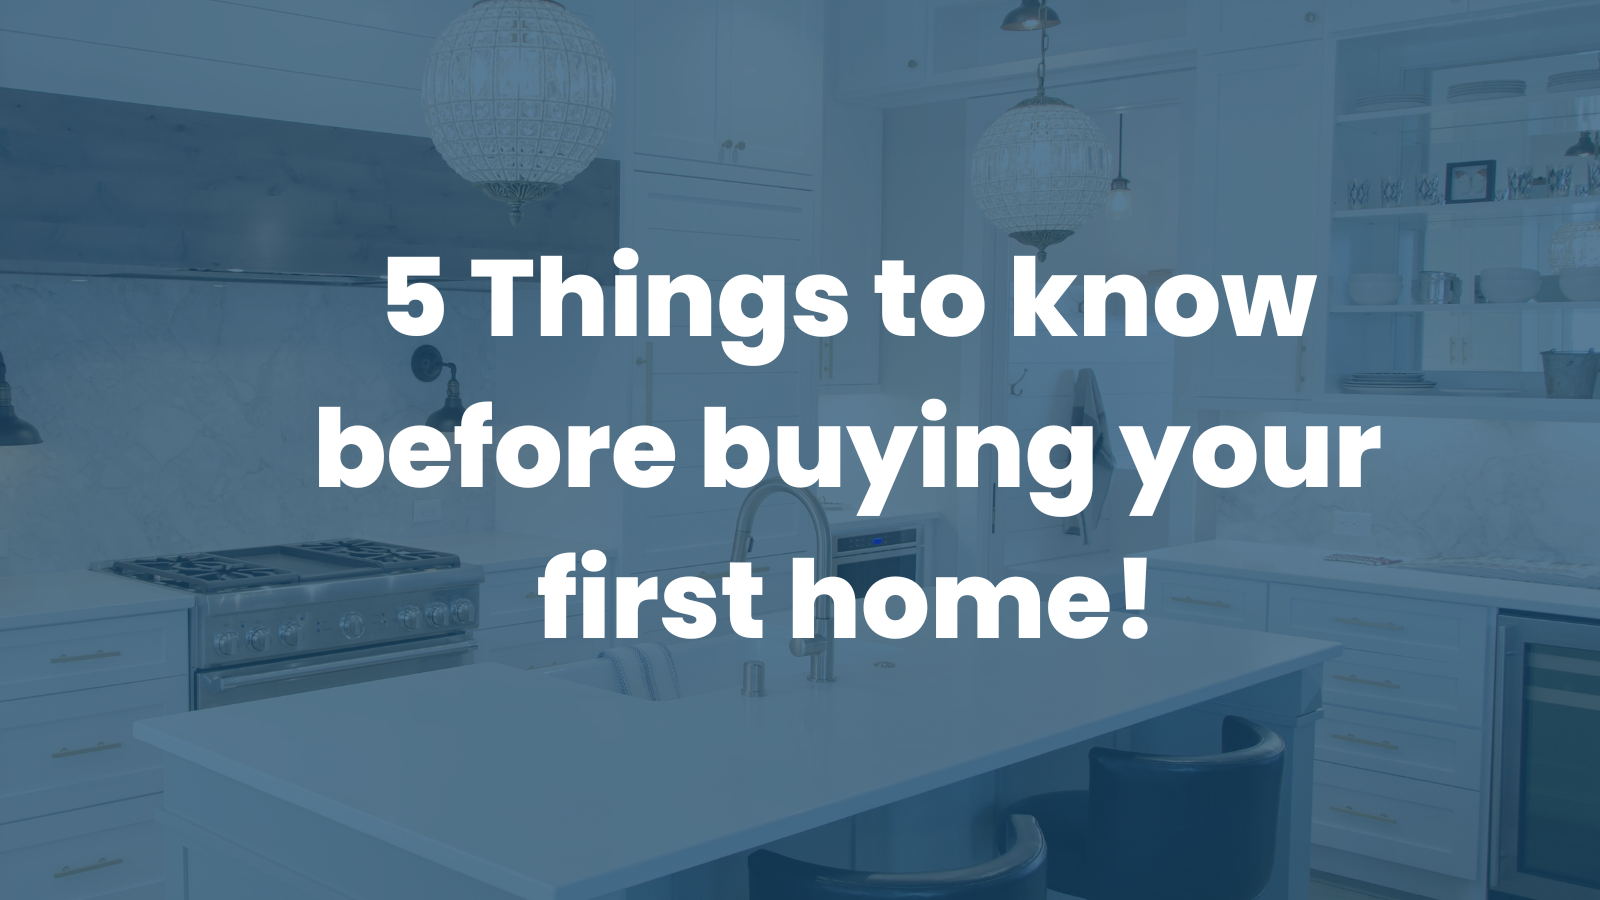 5 Things to know before buying your first home!